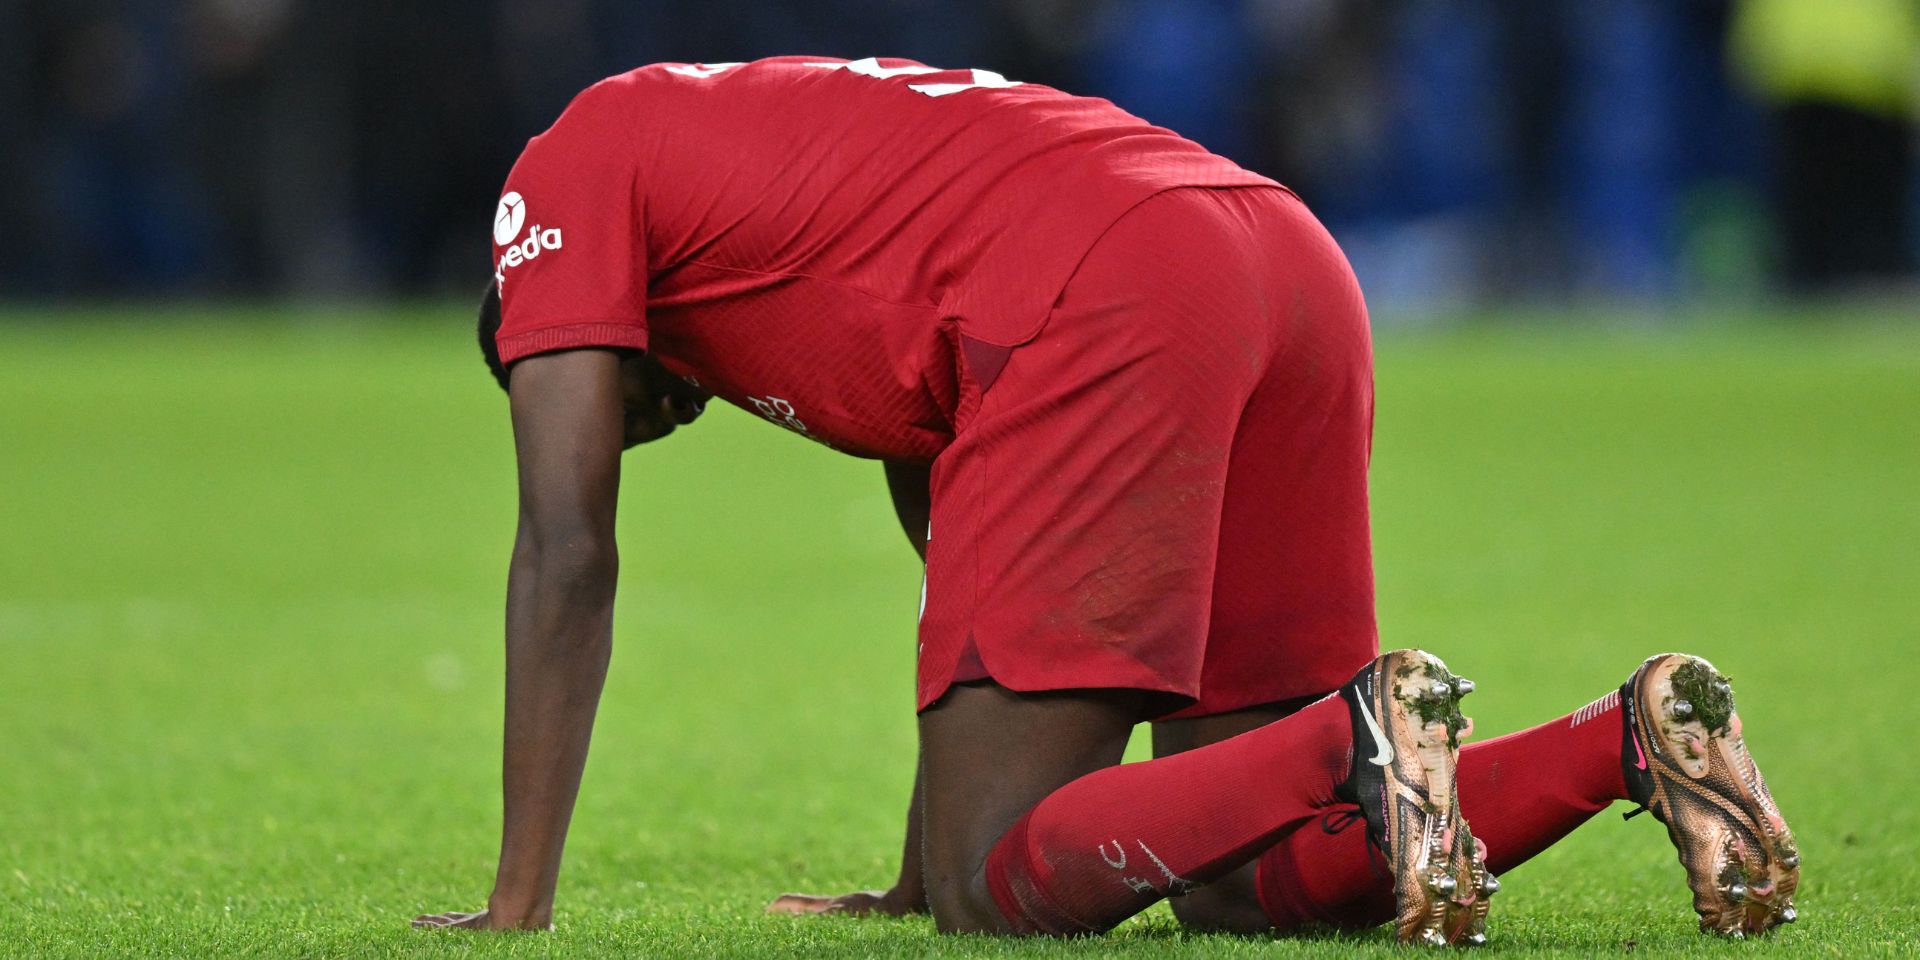 Paul Joyce confirms the fixtures Ibou Konate is set to miss with his devastating hamstring injury